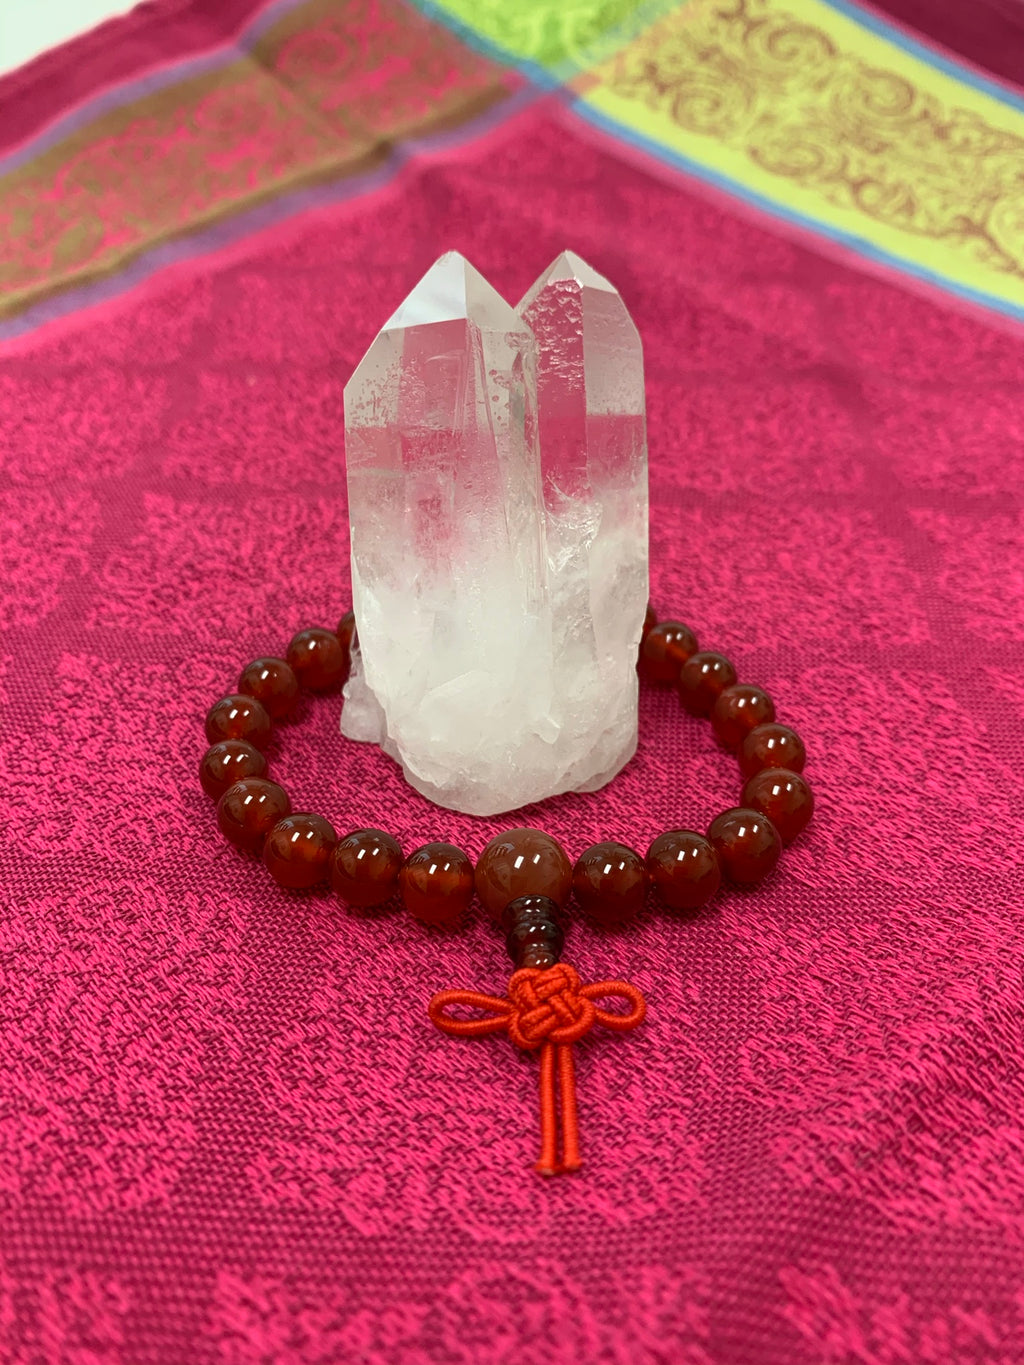 Carnelian power bracelet accented with red Chinese tassel knot. Beads are 8 mm. Carnelian promotes courage, creativity, vitality and dispels emotional negativity.